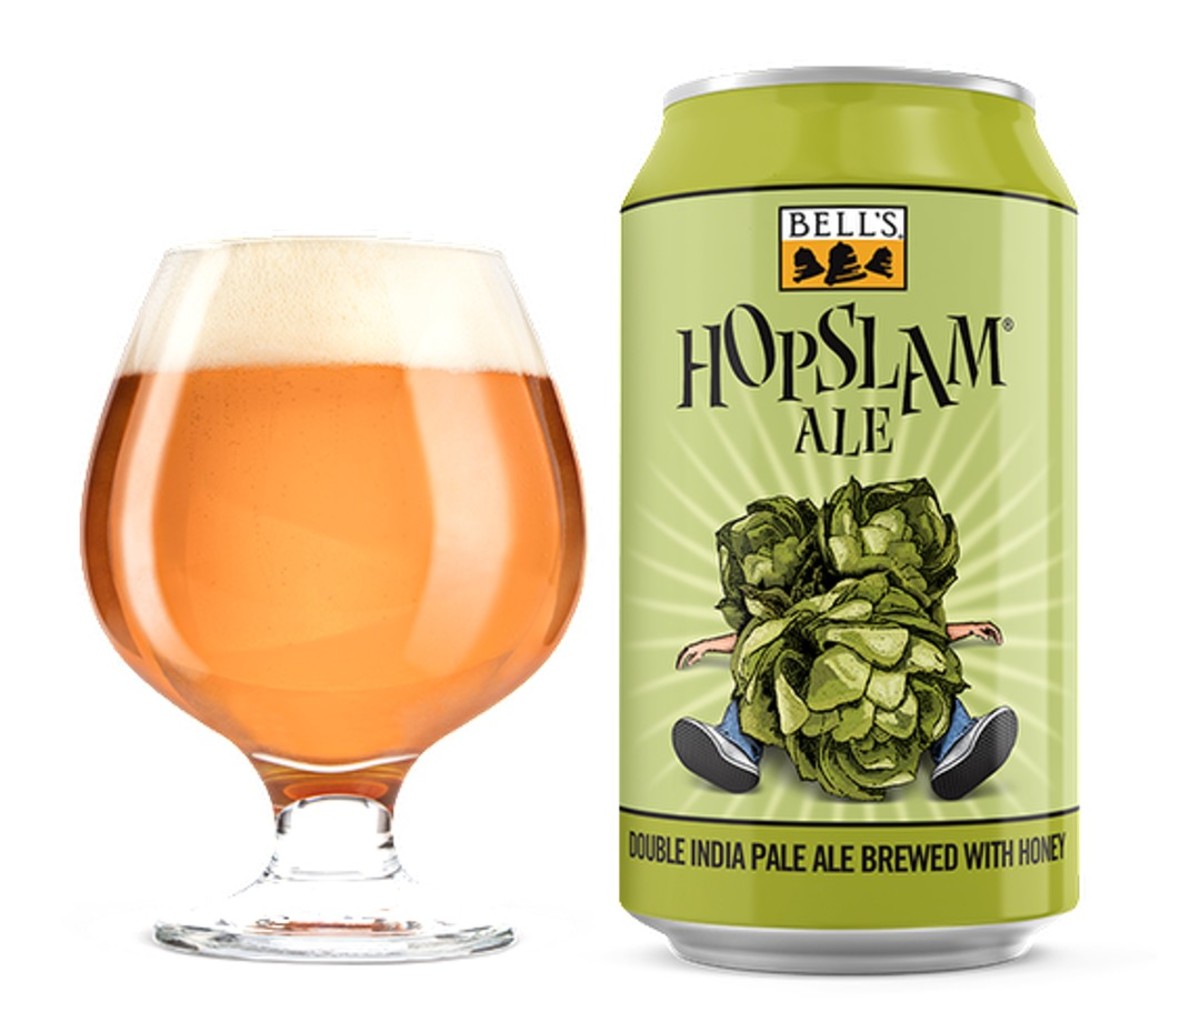 A glass and a can of Bell’s Hopslam Ale